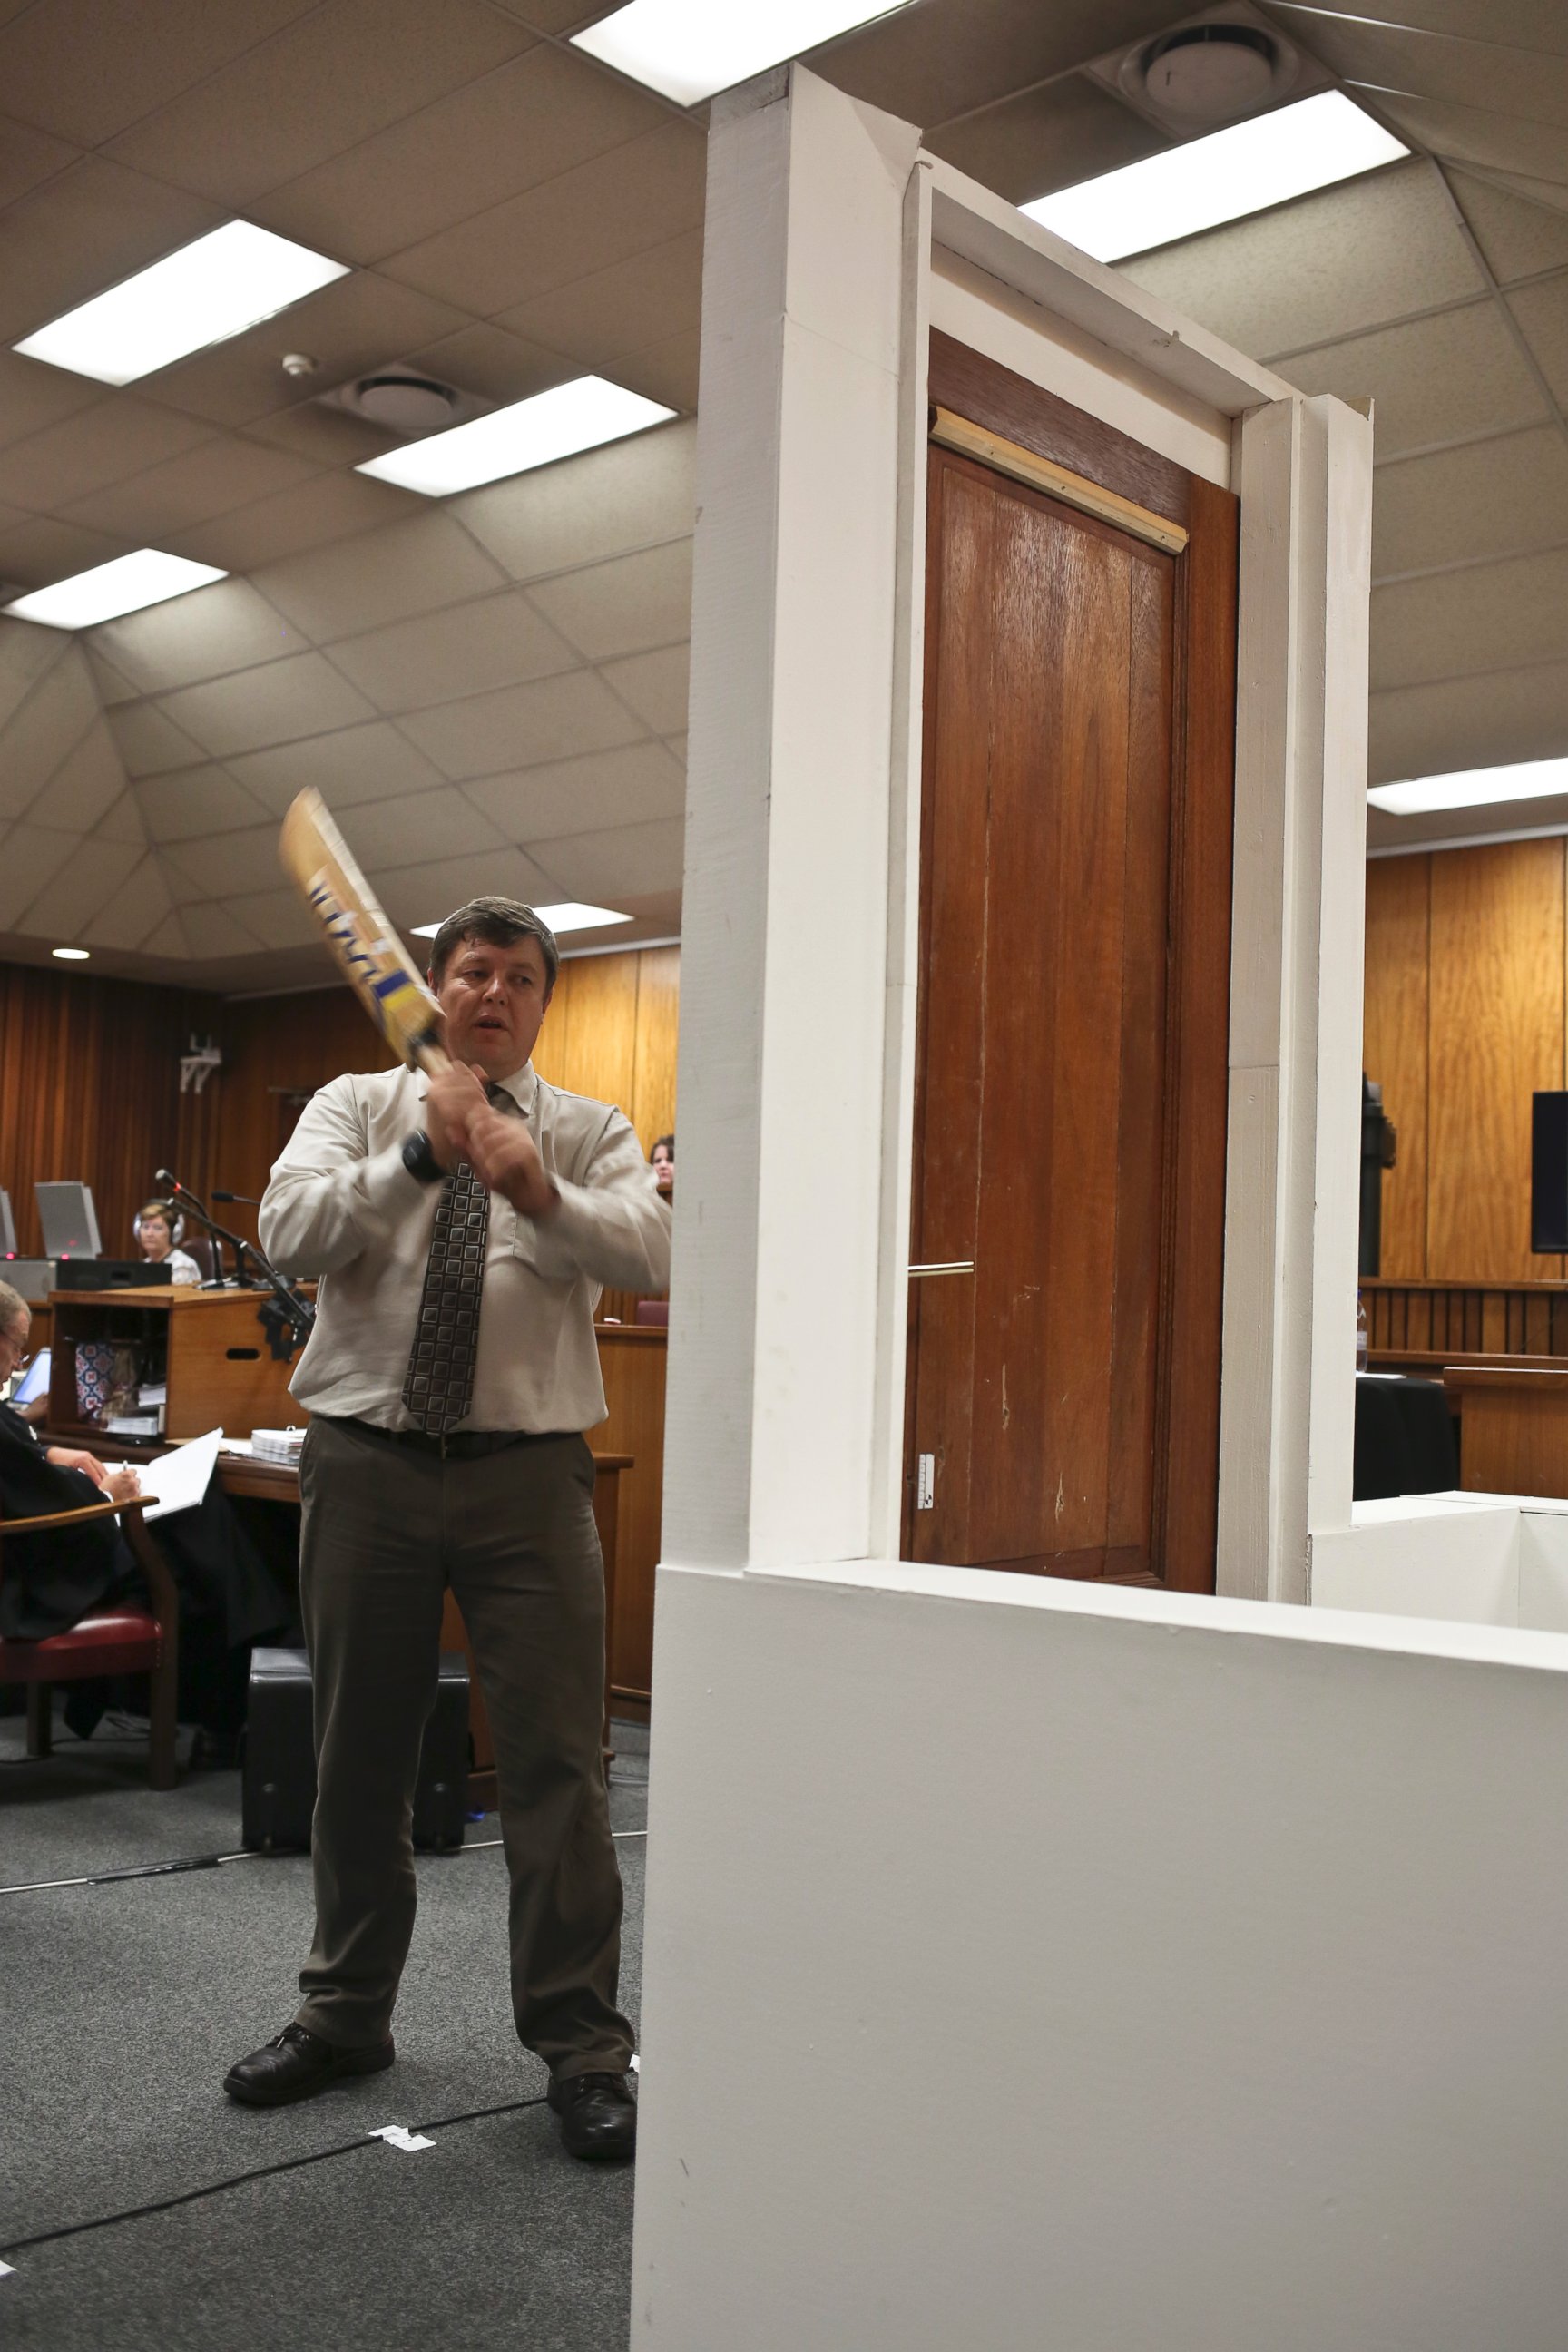 PHOTO: Forensic investigator Johannes Vermeulen takes part in the reconstruction of hitting a door with a cricket bat during the trial of Oscar Pistorius in Pretoria, South Africa on March 12, 2014. 